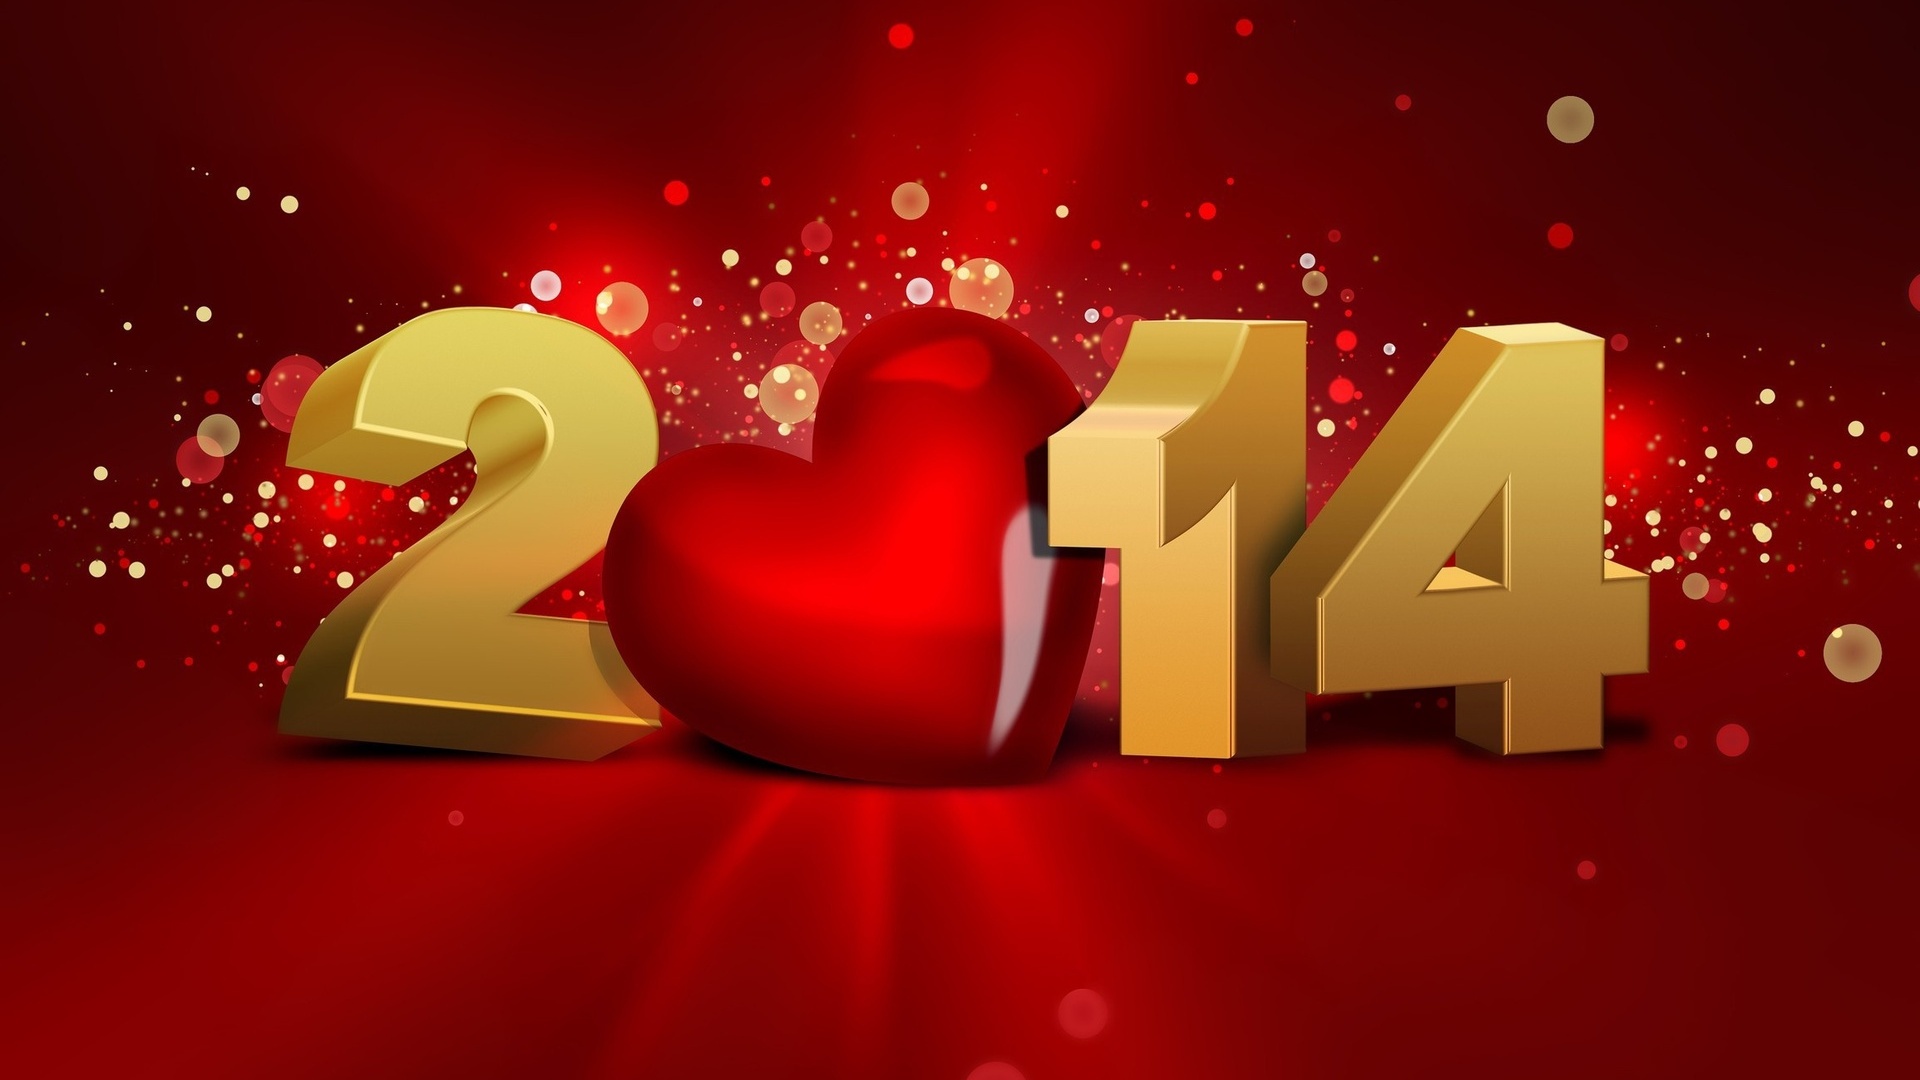 Top 10 Happy New Year 2014 Wallpapers and Themes | All for Windows ...